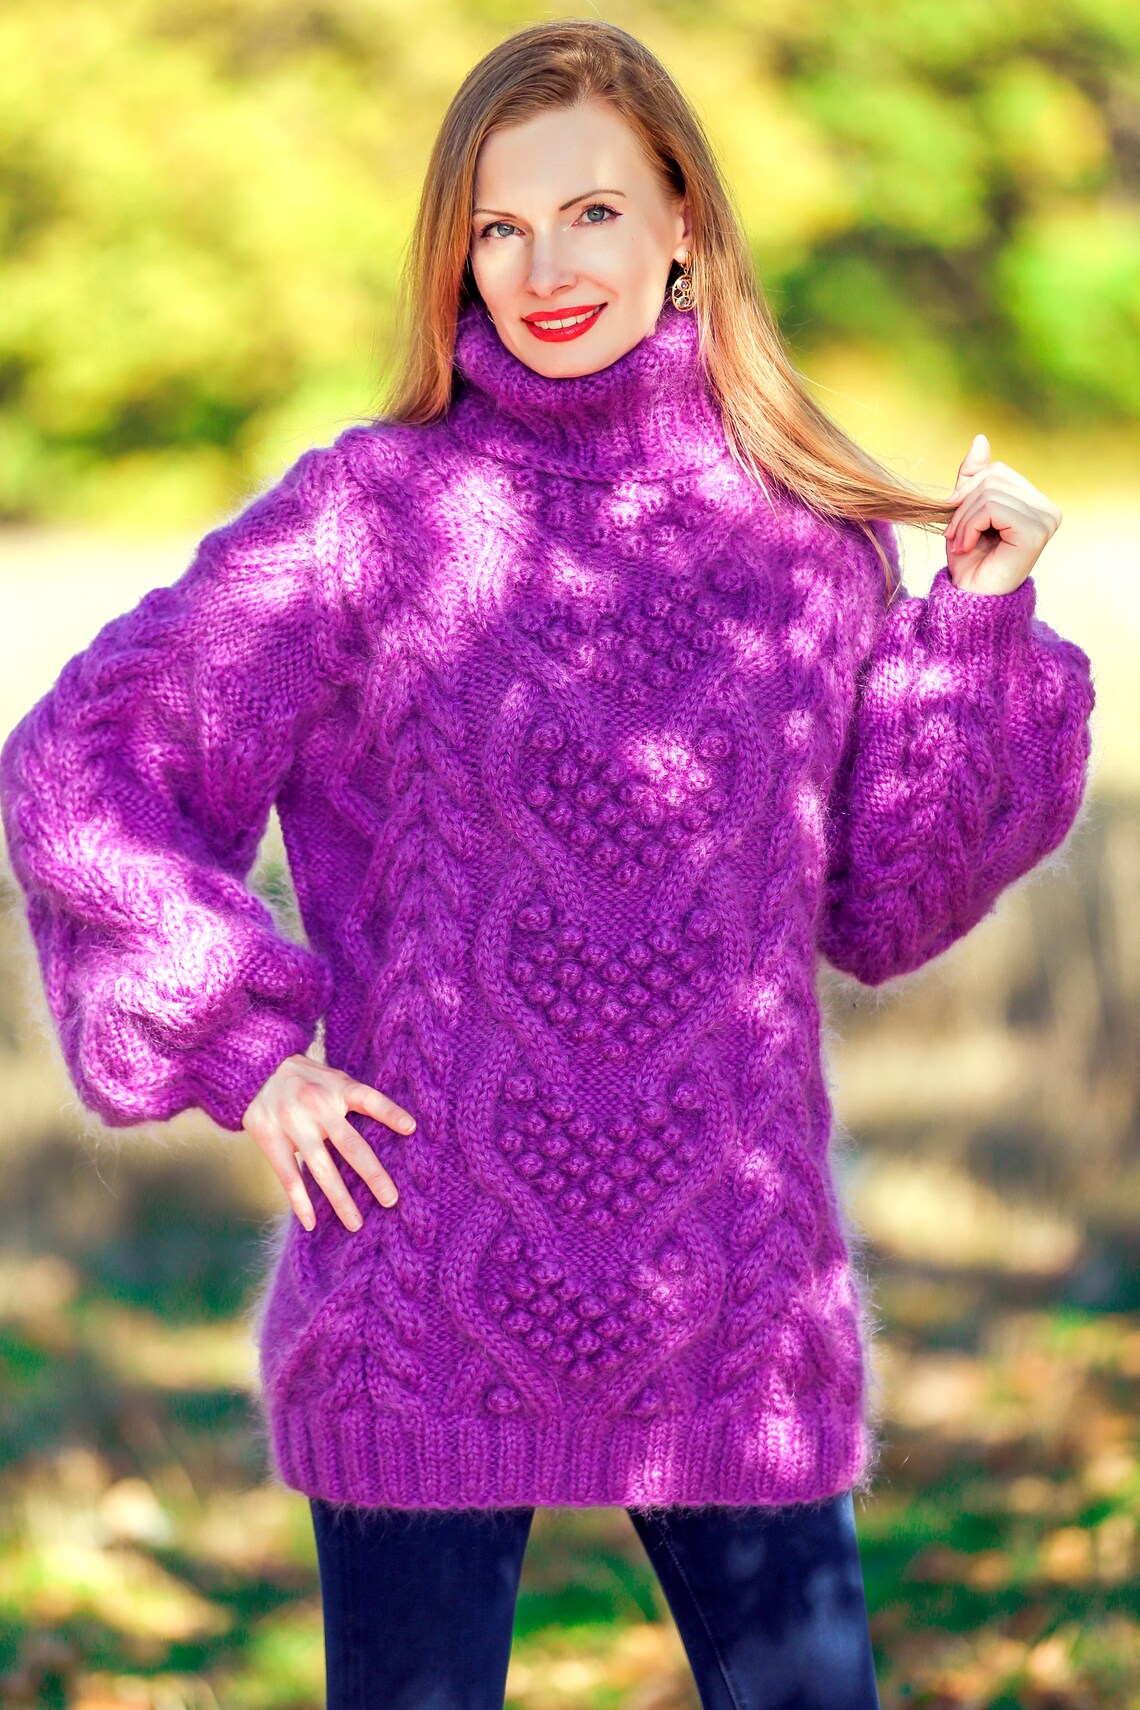 Bespoke cable knit mohair sweater hand knitted unique pullover | Etsy